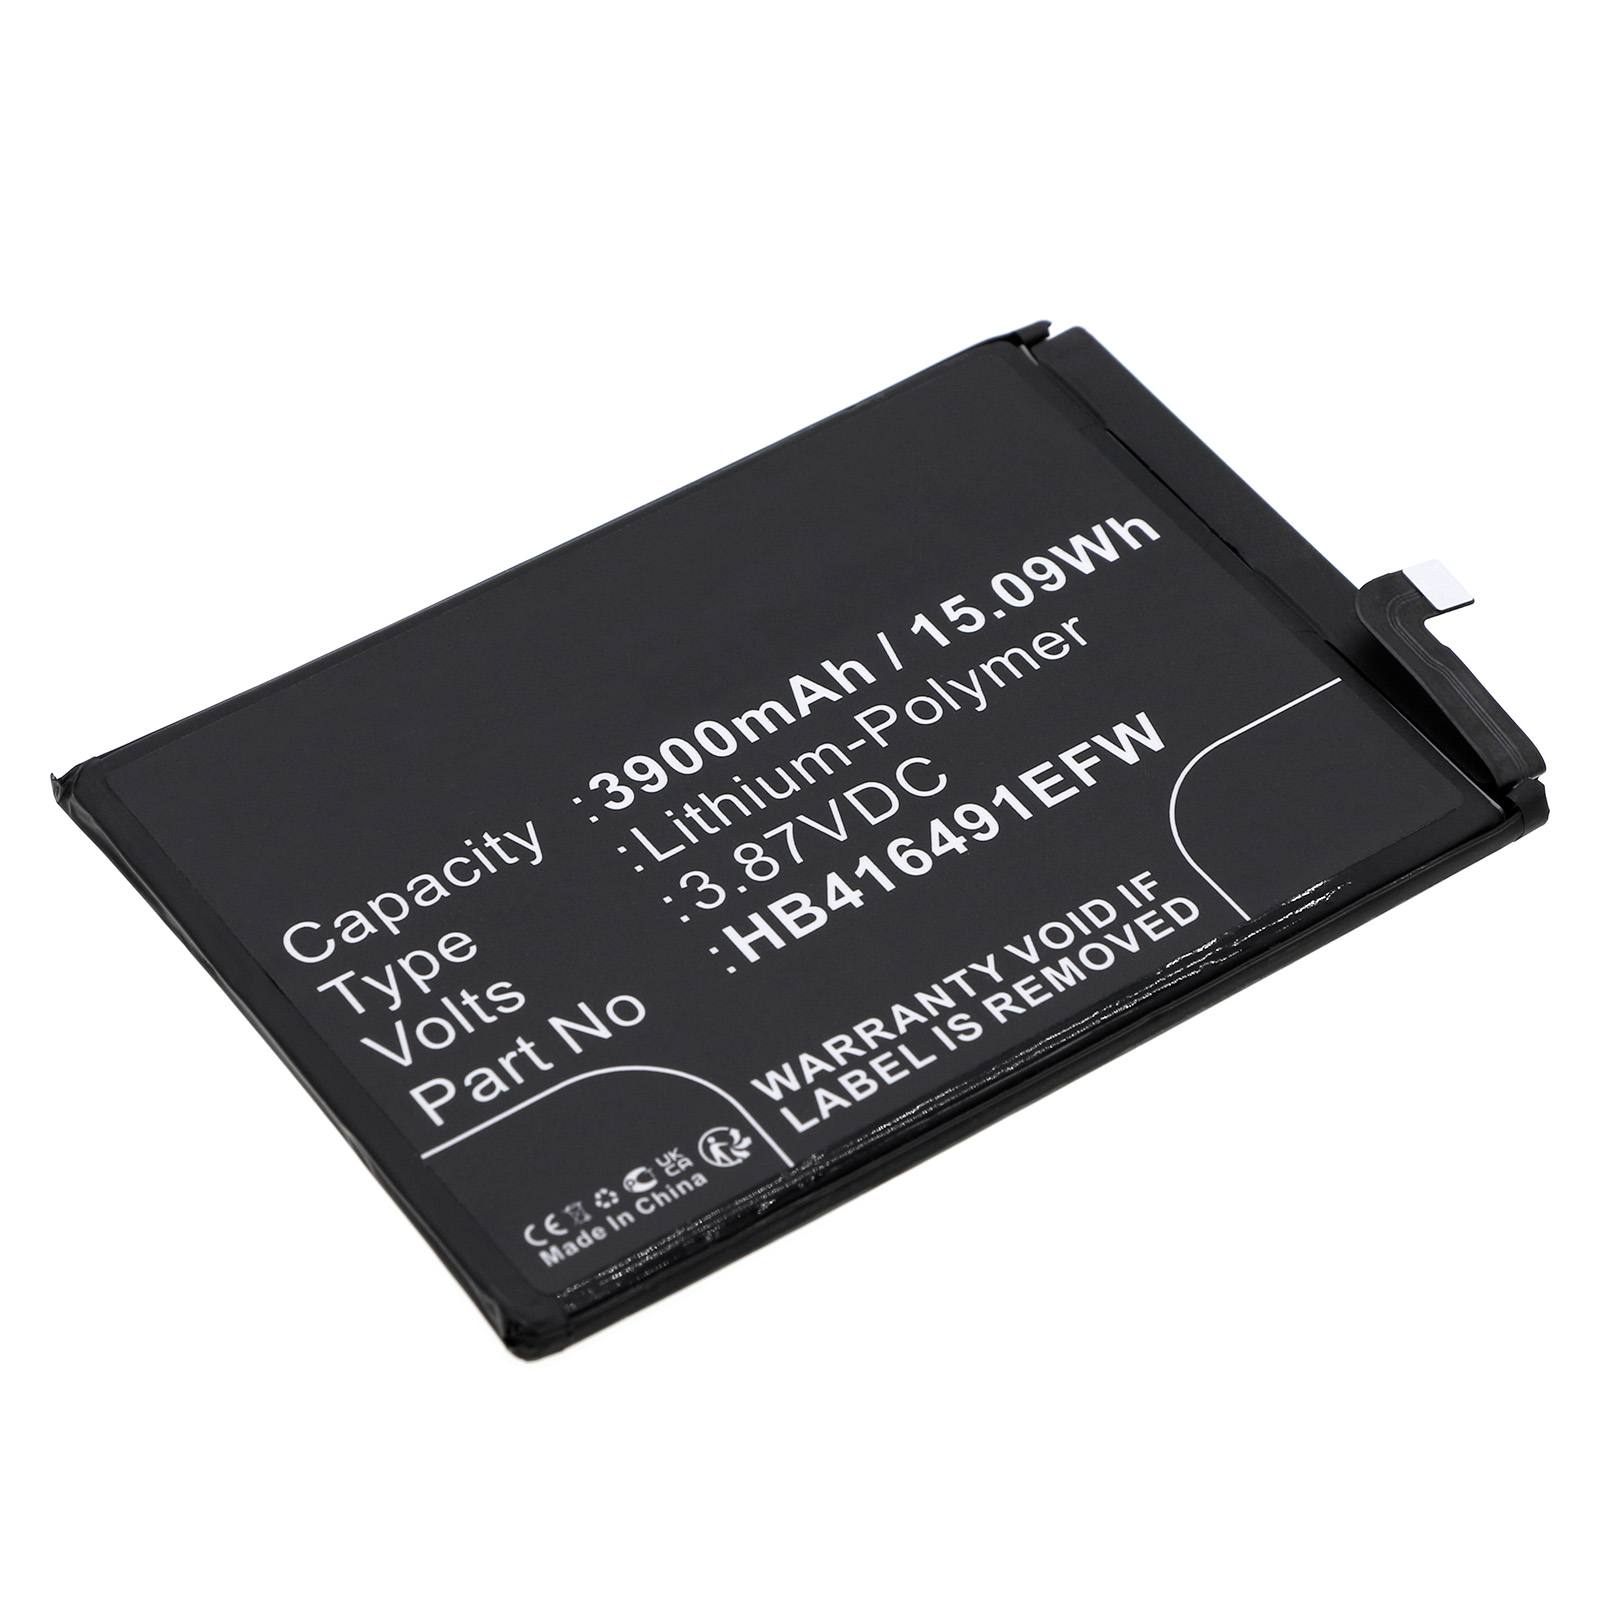 Synergy Digital Cell Phone Battery, Compatible with Honor HB416491EFW Cell Phone Battery (Li-Pol, 3.87V, 3900mAh)